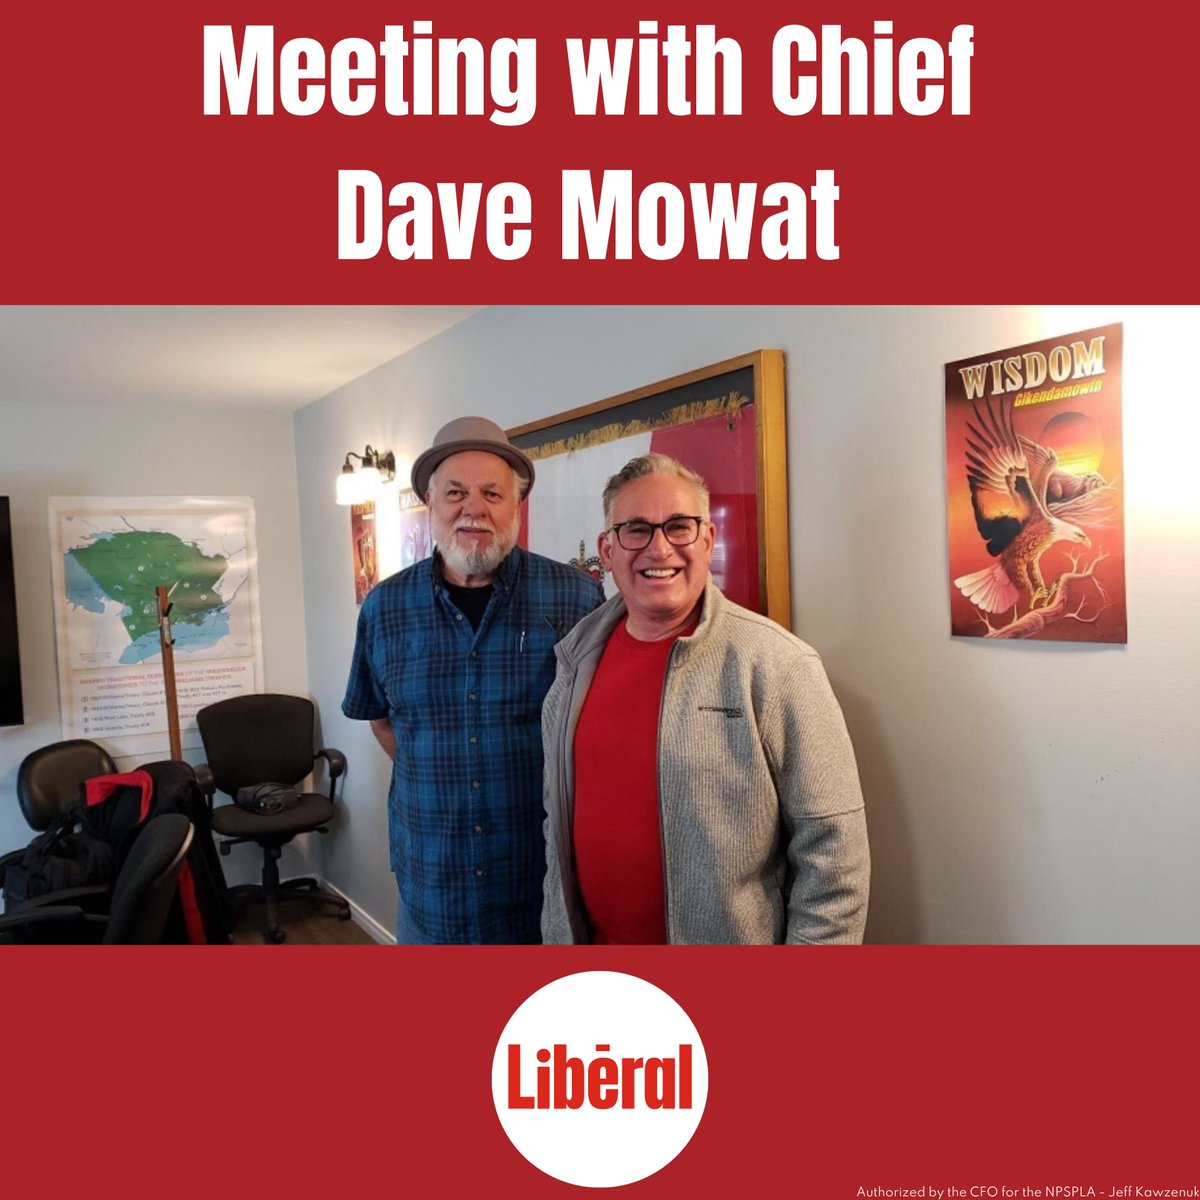 It was a pleasure to meet and discuss mutual areas of interest with Chief Mowat. I would like to thank him for taking the time out of his busy schedule!